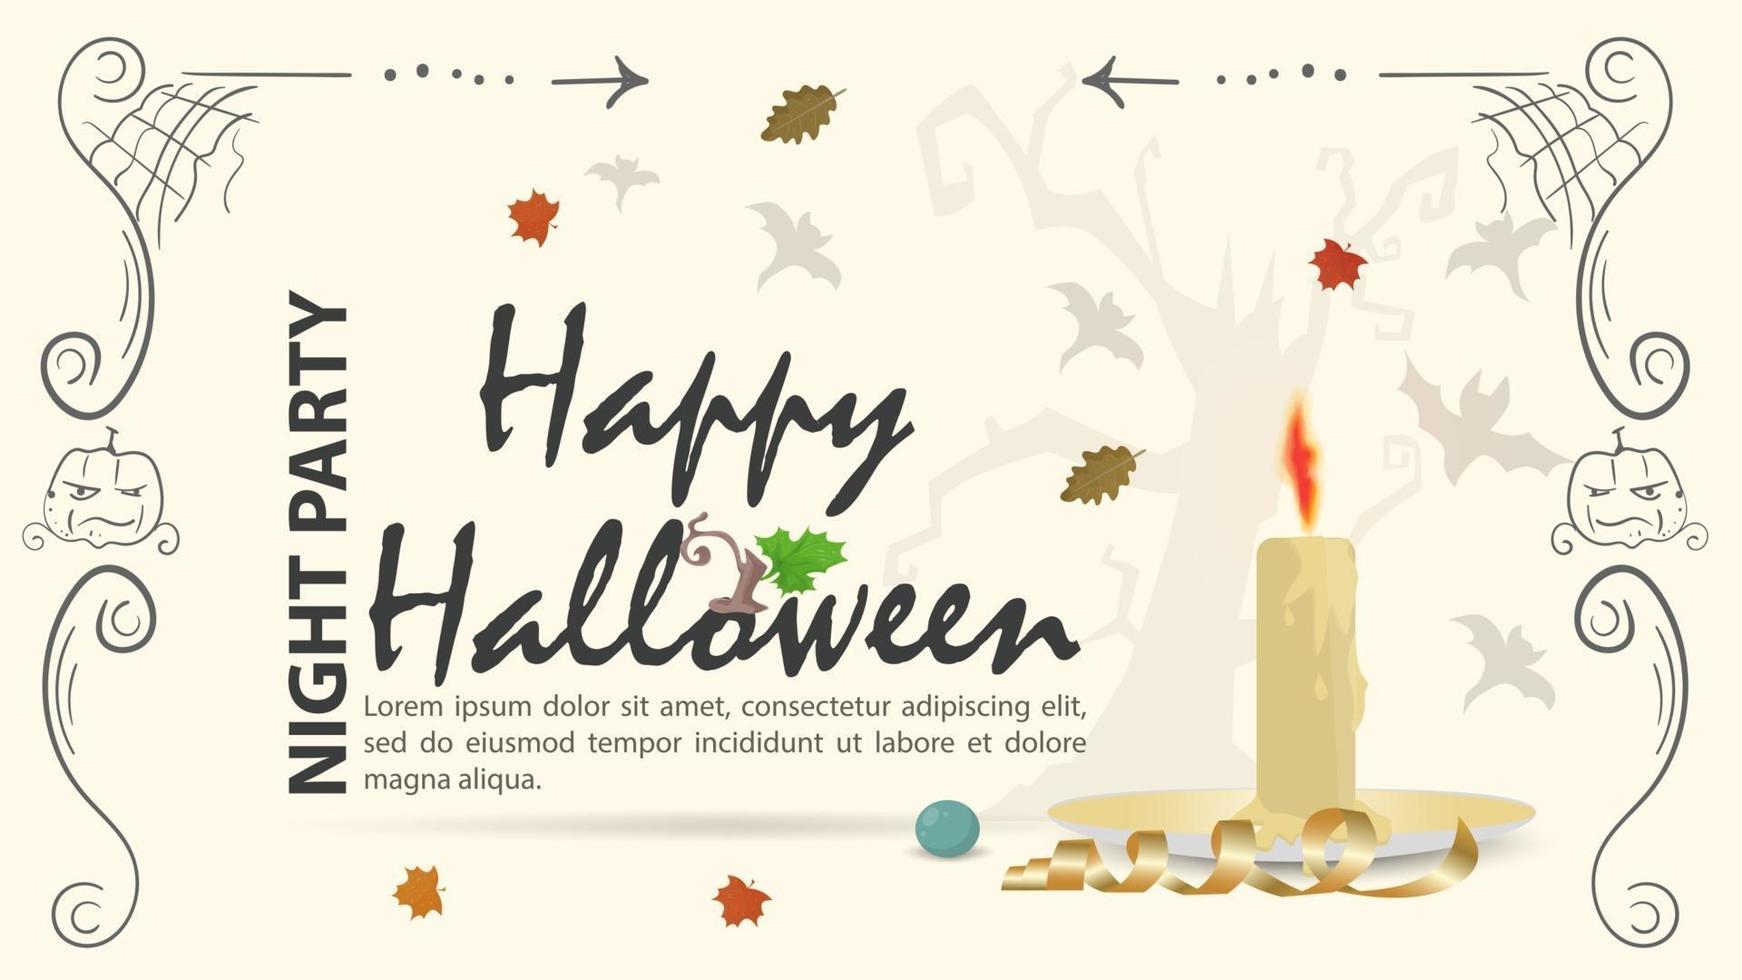 Candle among the leaves design for the Halloween vector